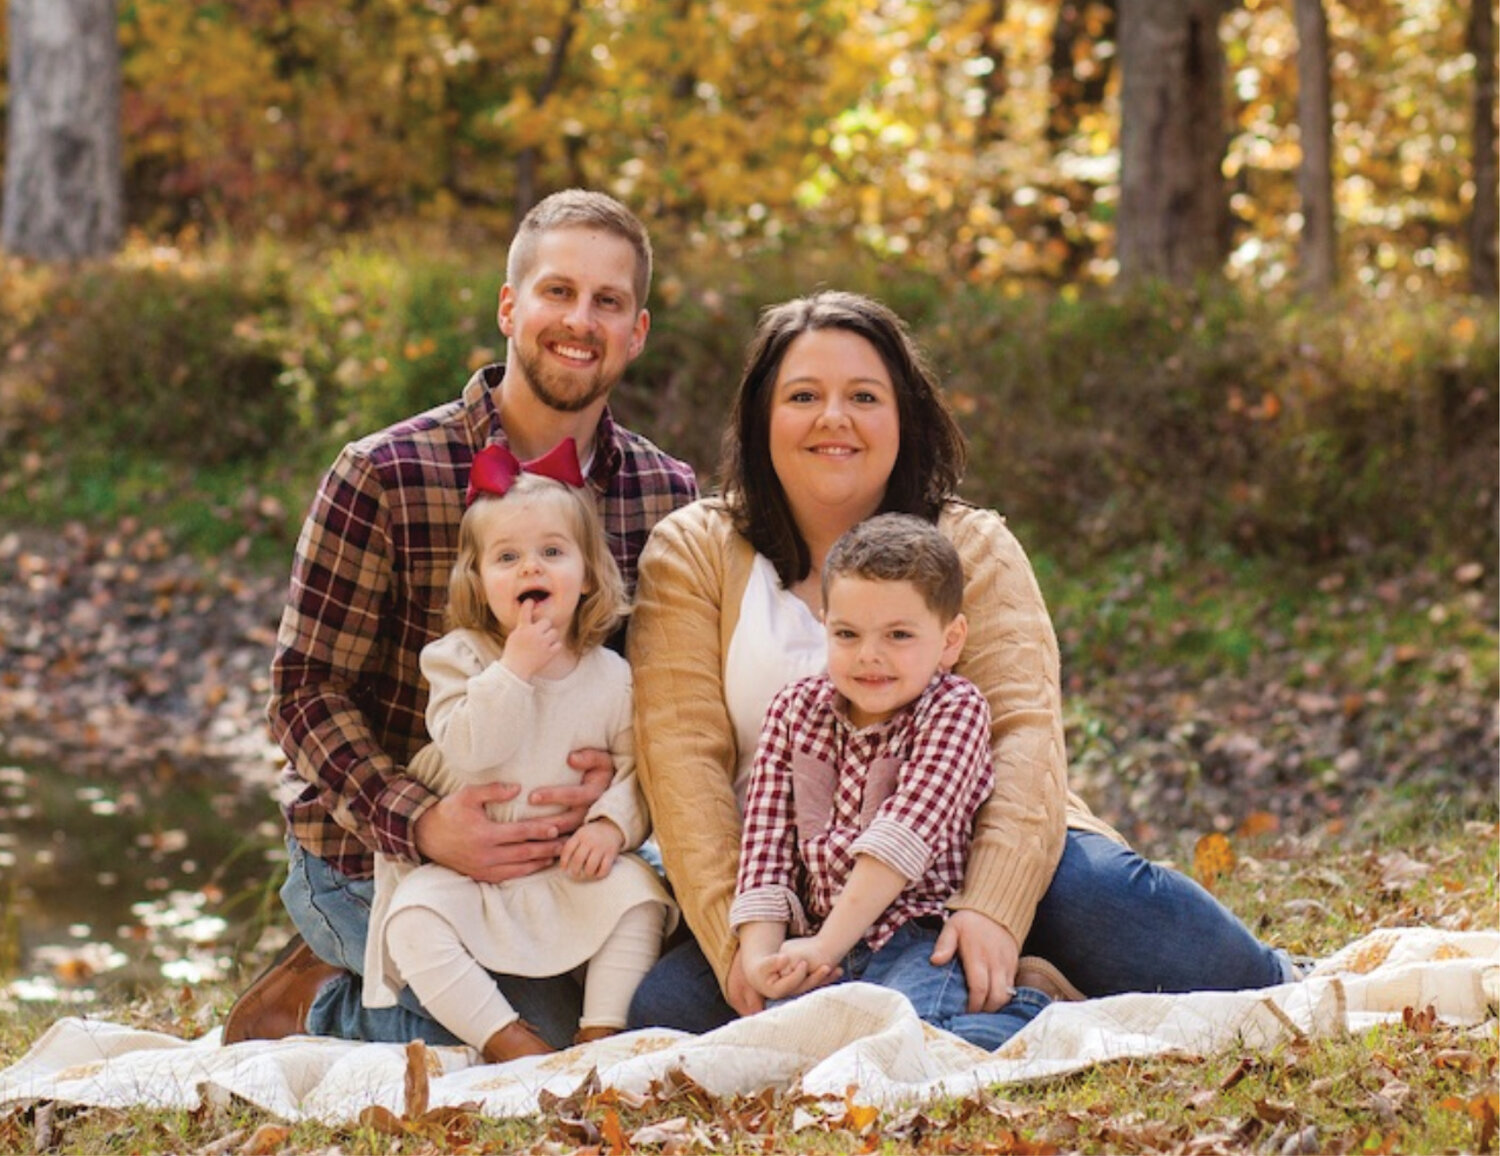 Jared Copeland and his wife, Natasha, live in Spencer with children Maddux, age 5, and Myla, age 2.